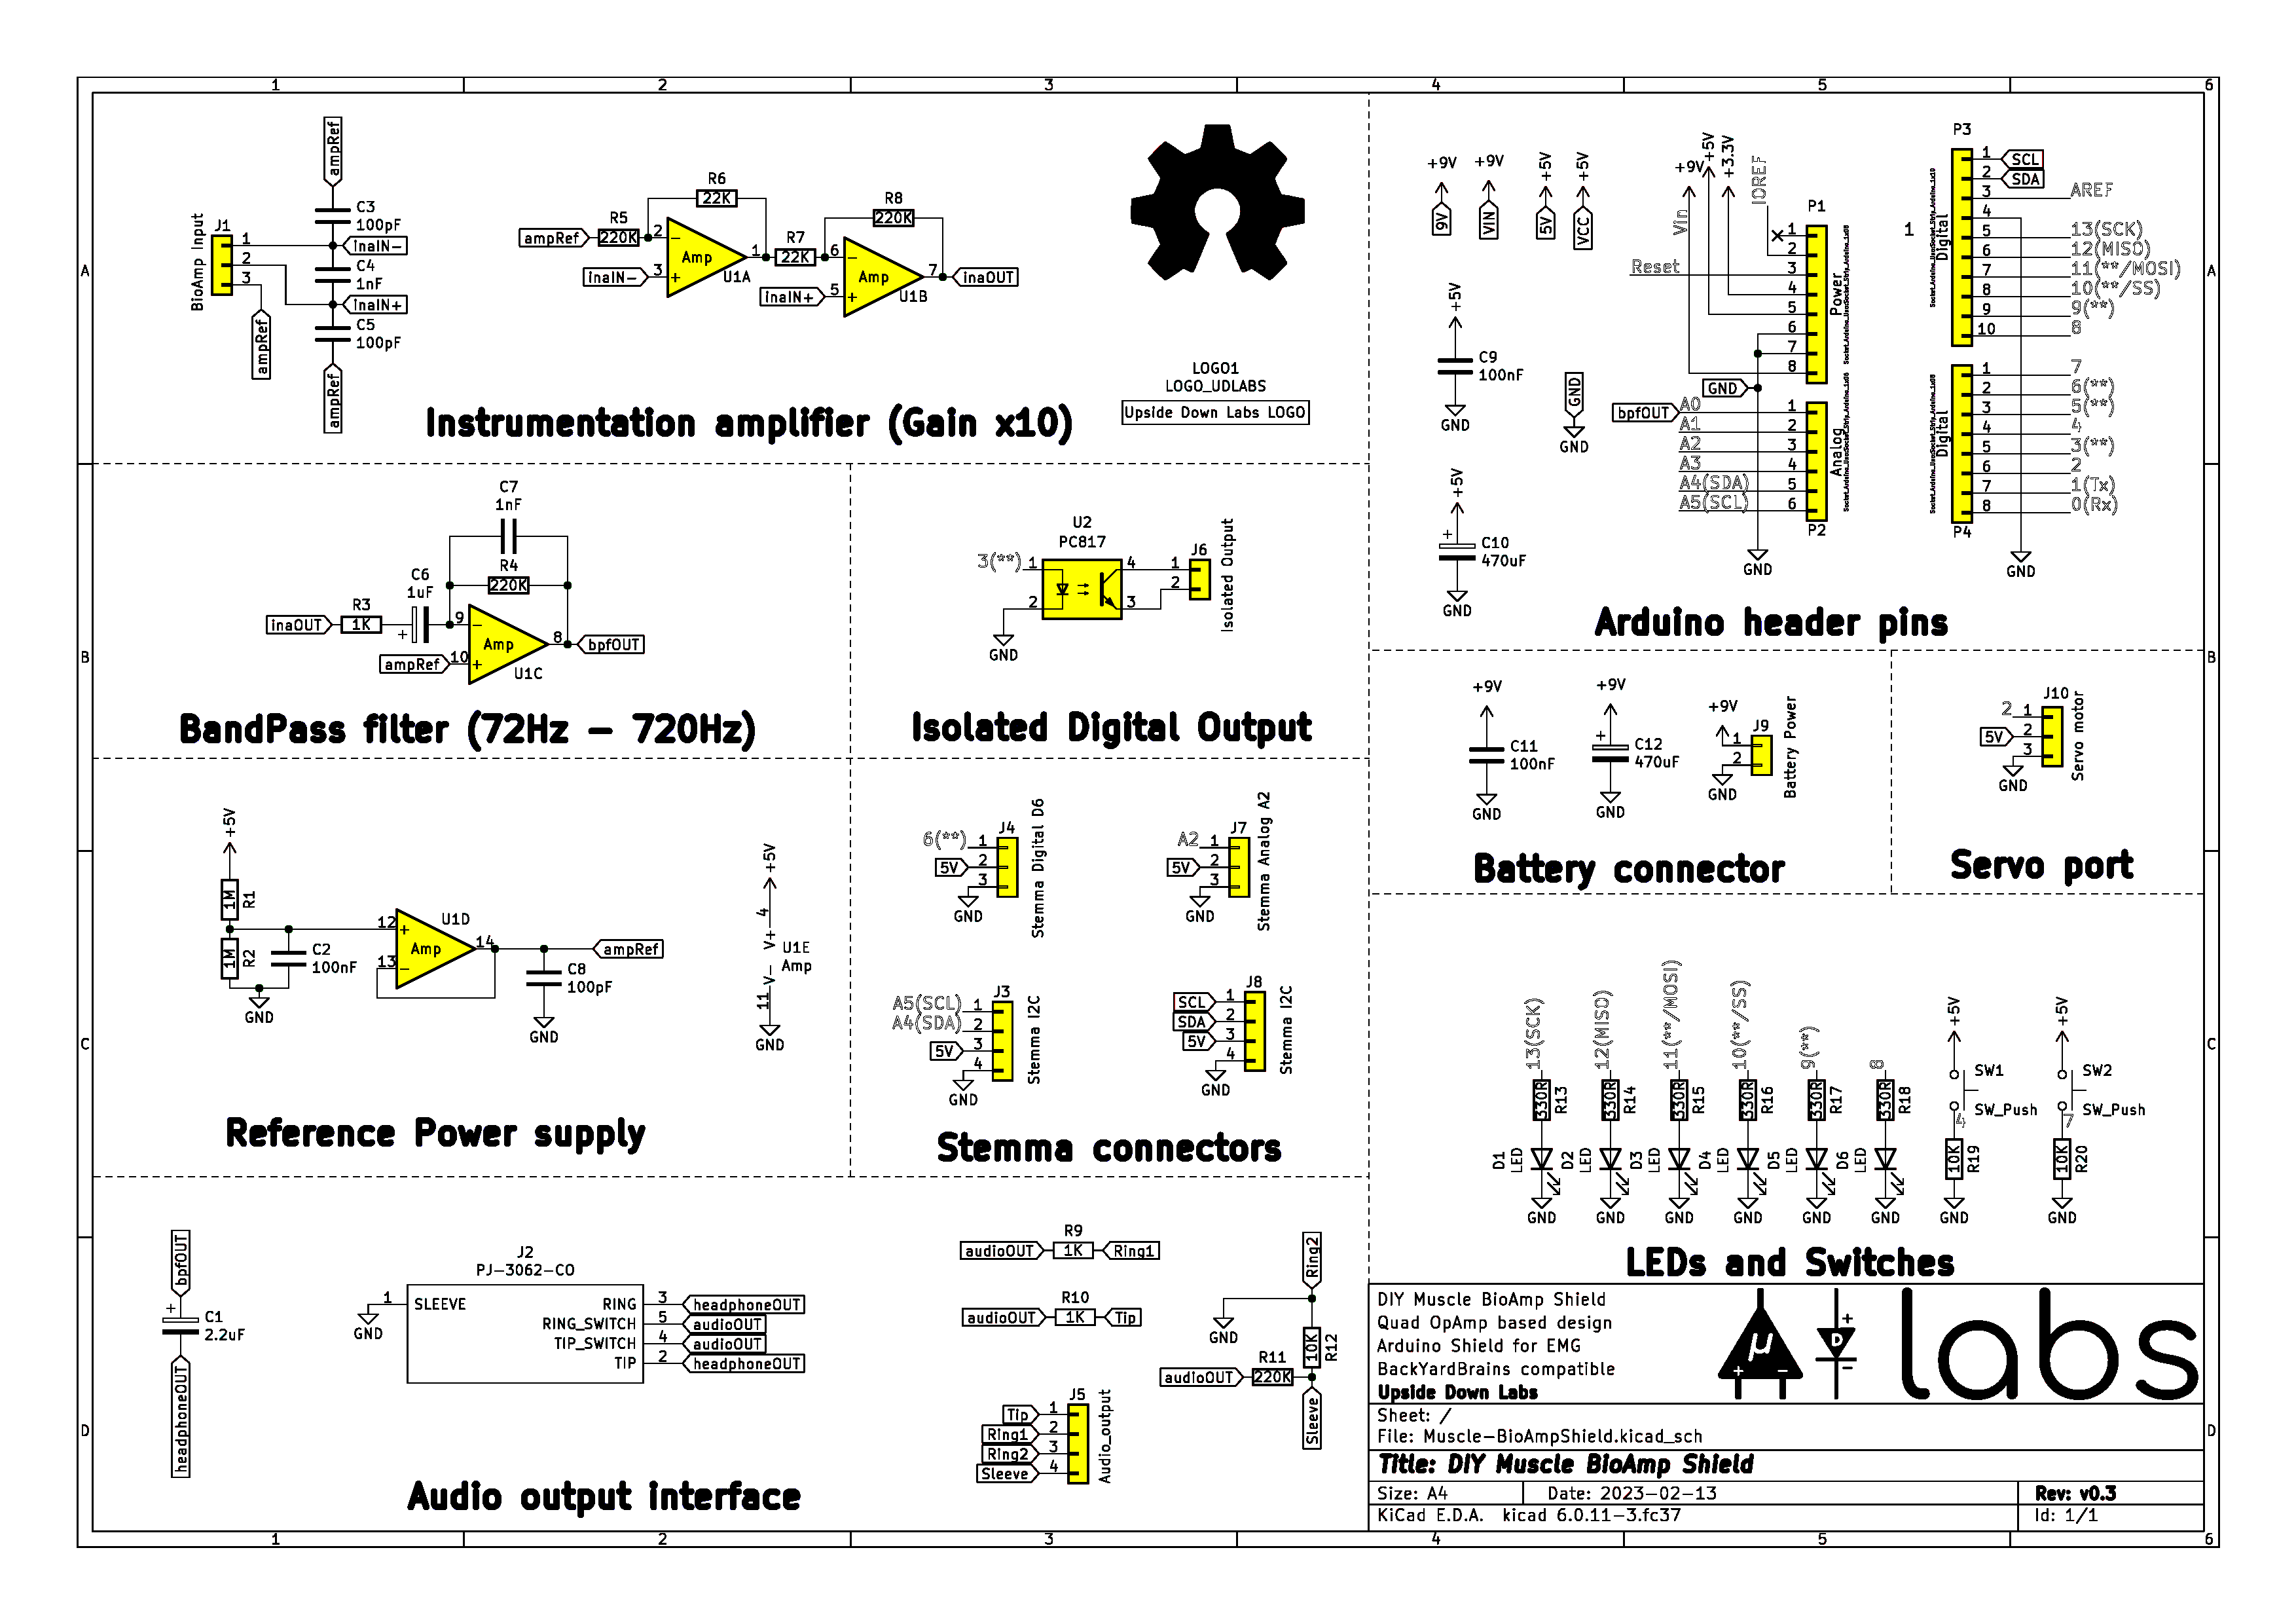 ../../../_images/Schematic.png